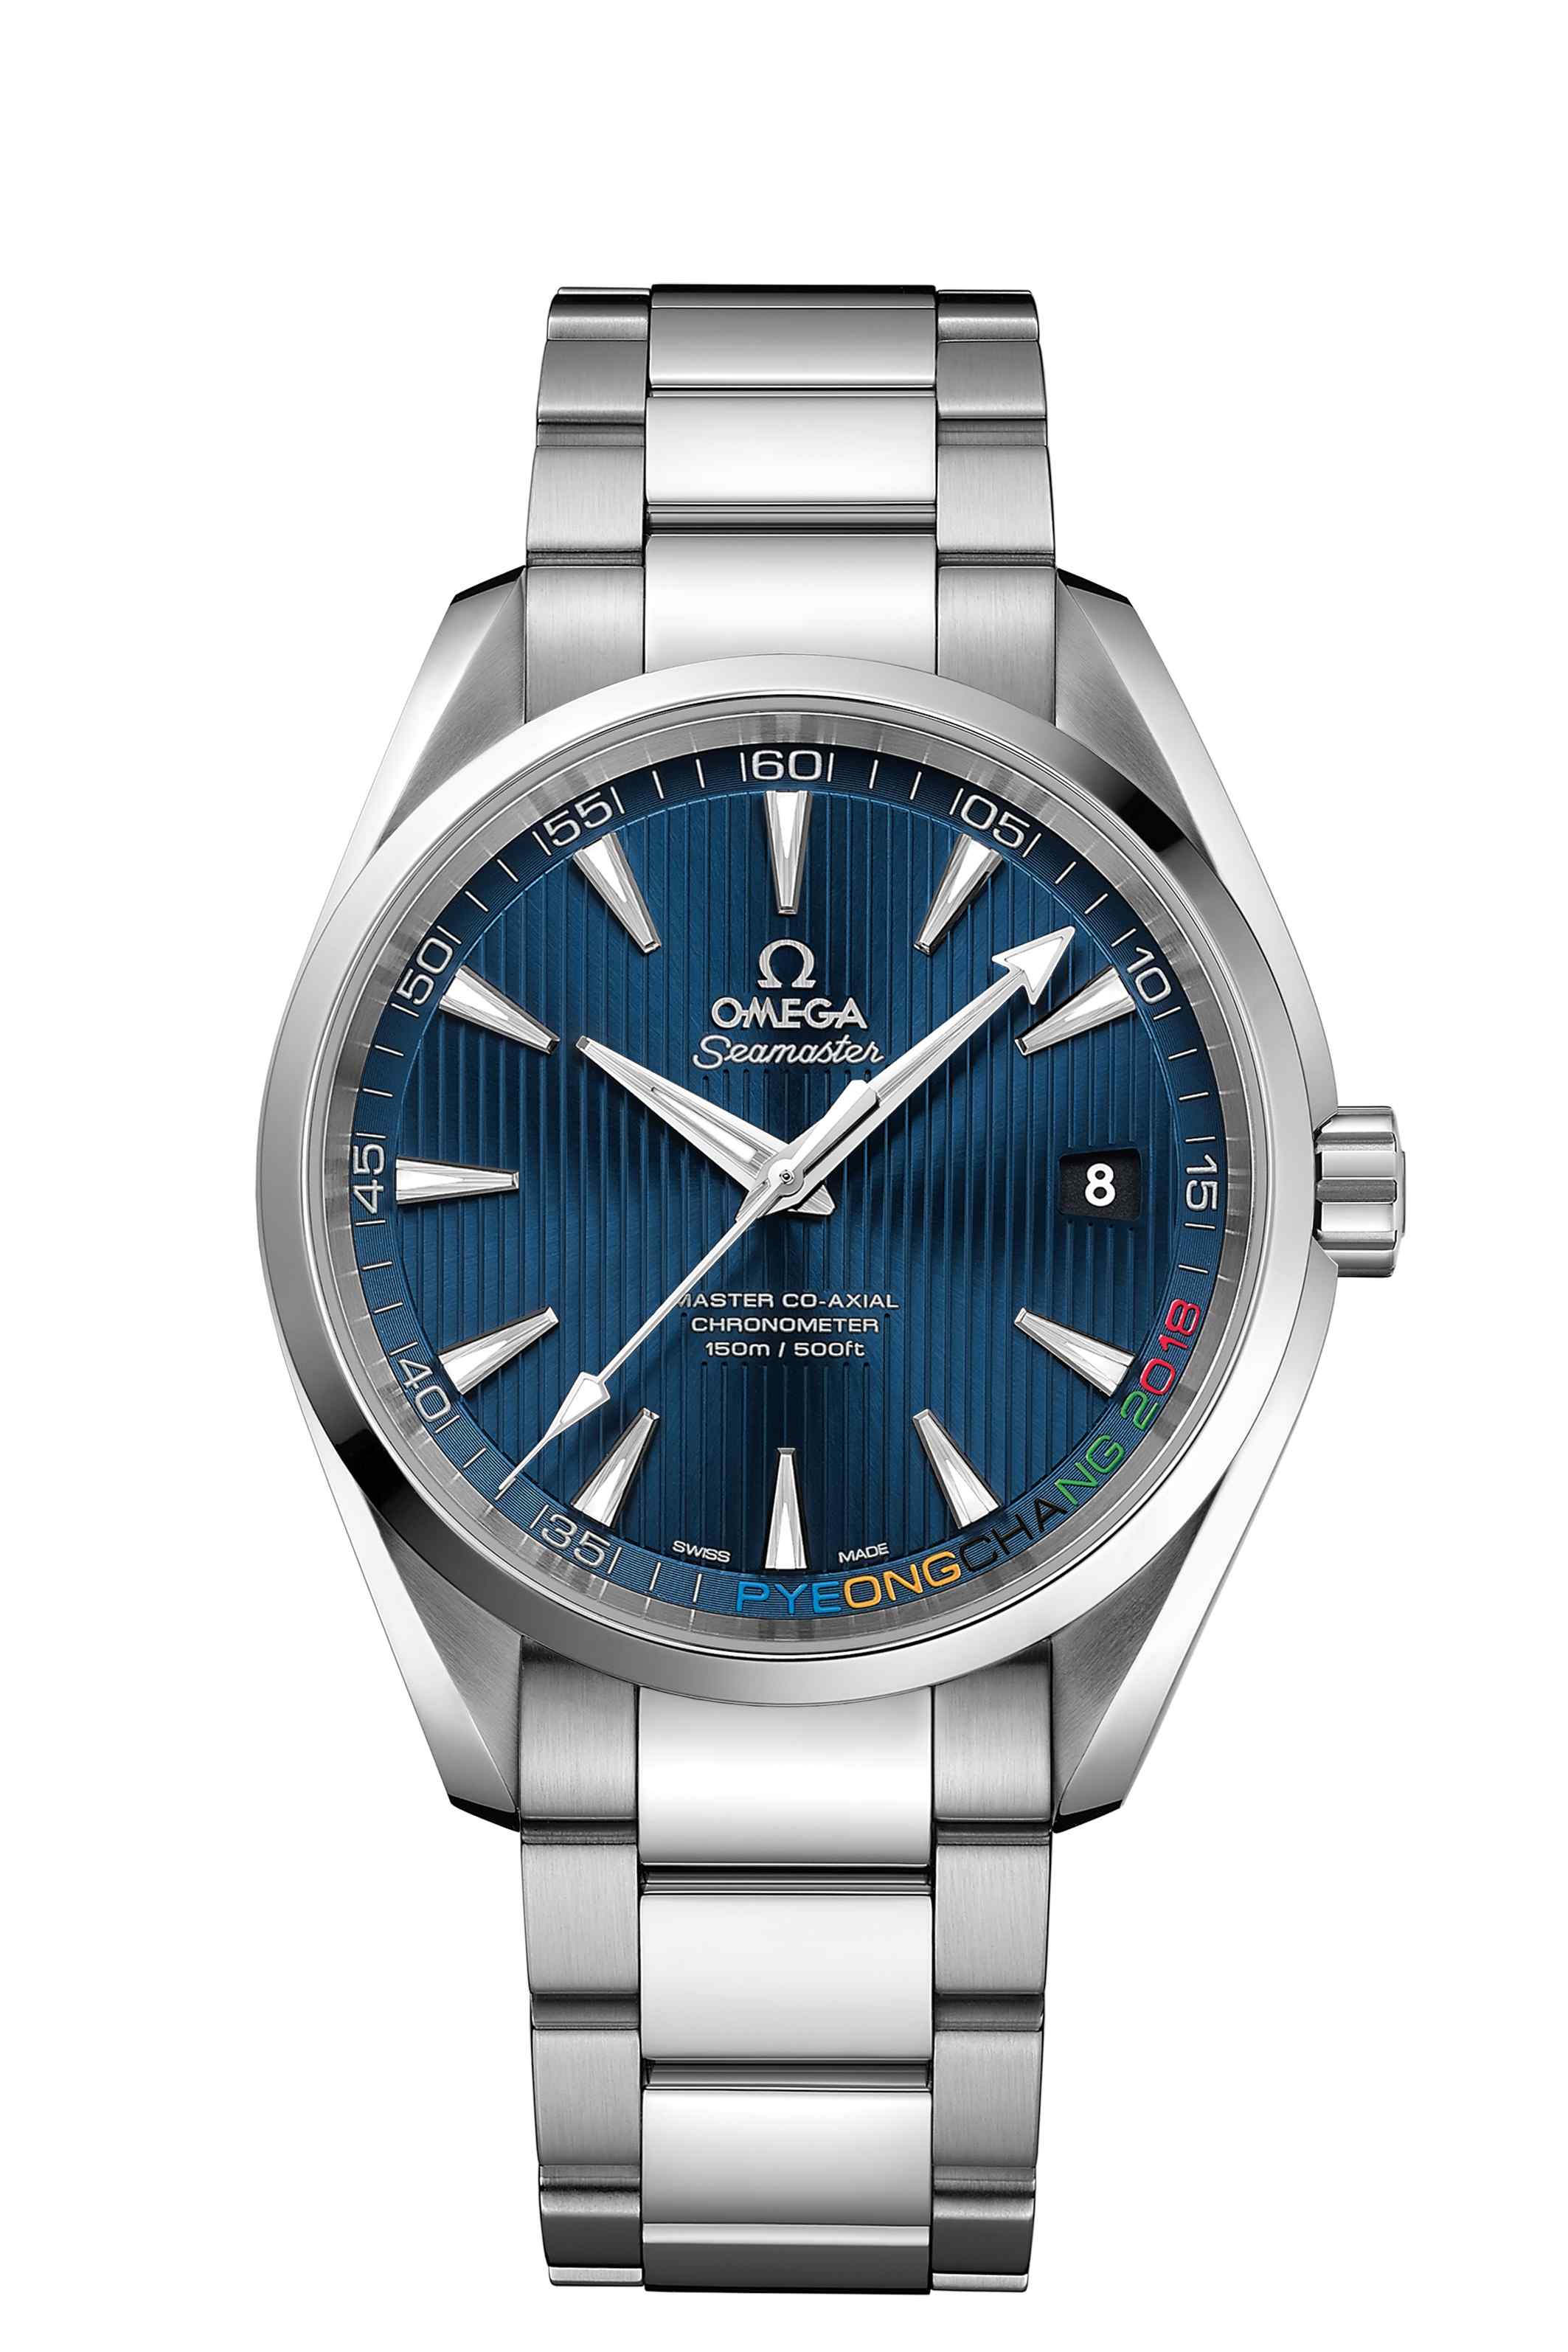 You are currently viewing OMEGA SEAMASTER AQUA TERRA “PYEONGCHANG 2018” LIMITED EDITION